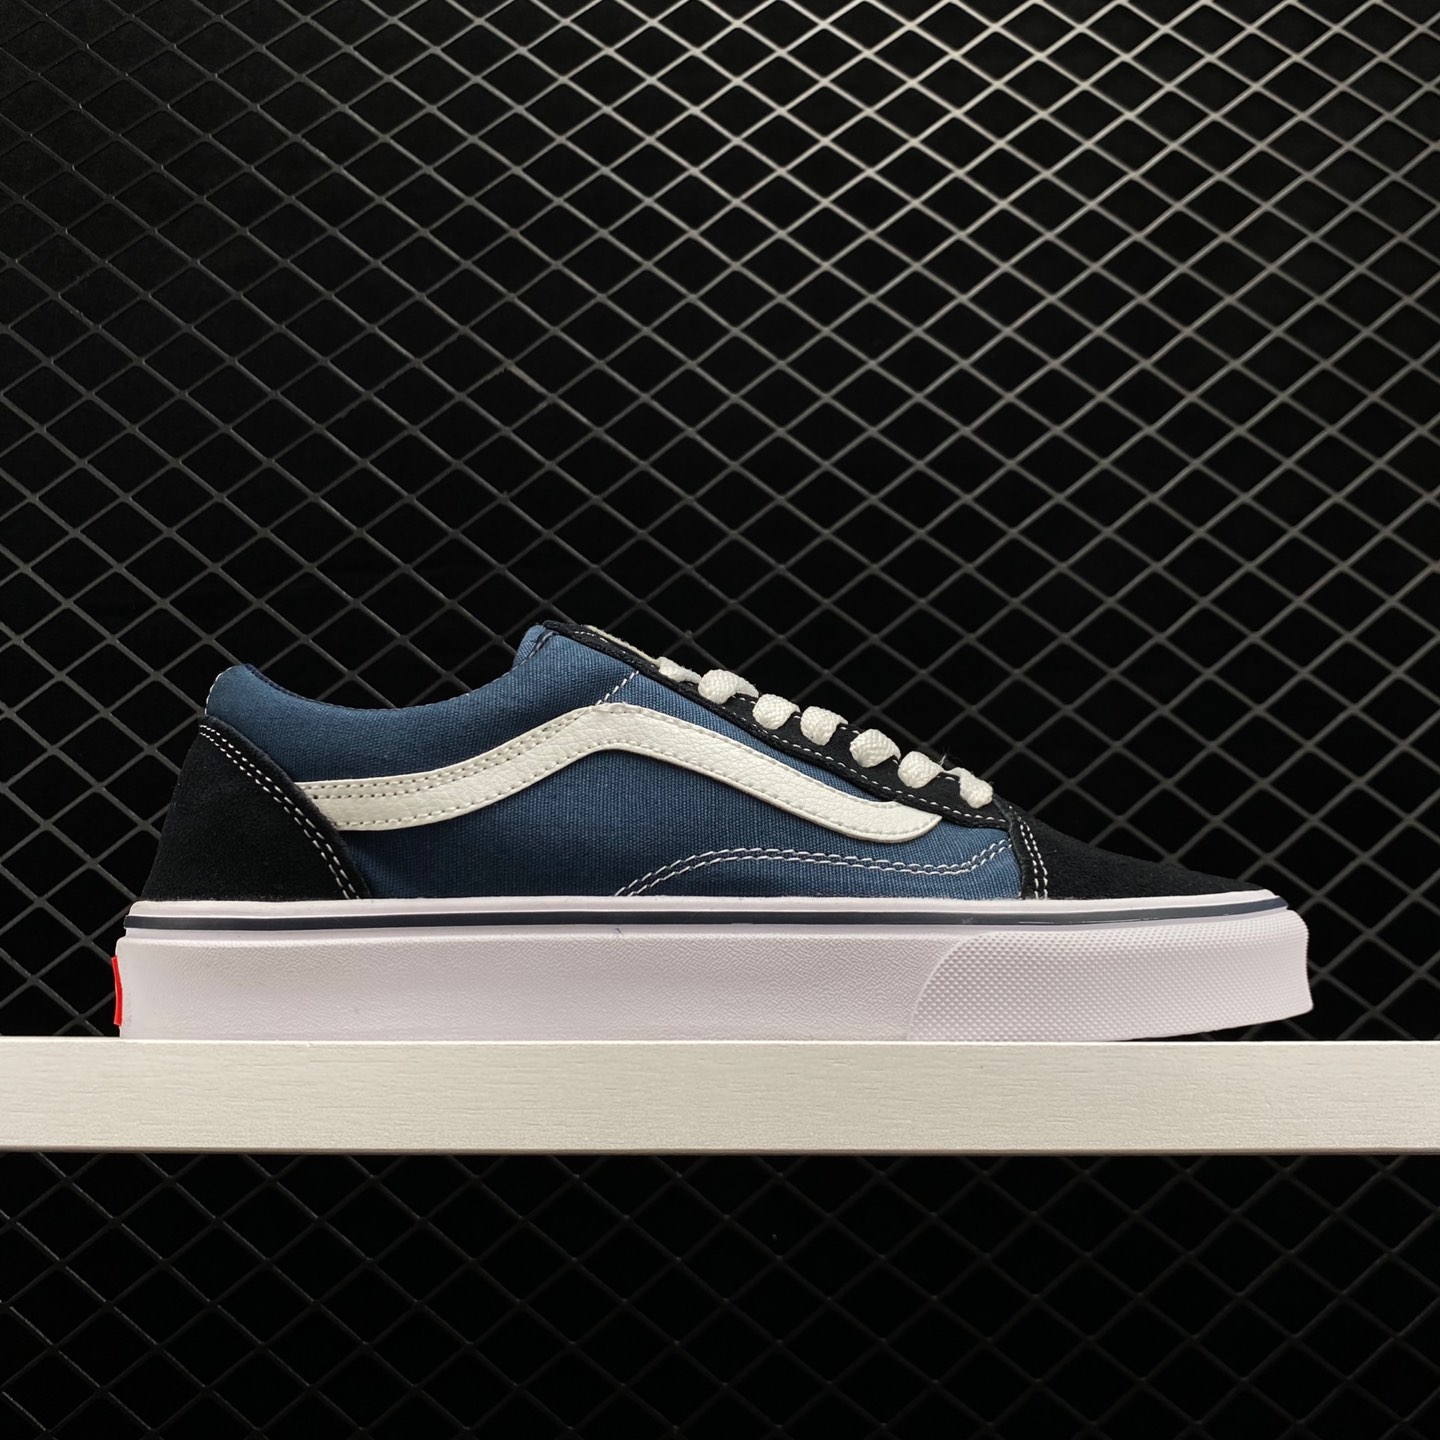 Vans Old Skool 'Navy' VN000D3HNVY - Classic and Stylish Sneakers